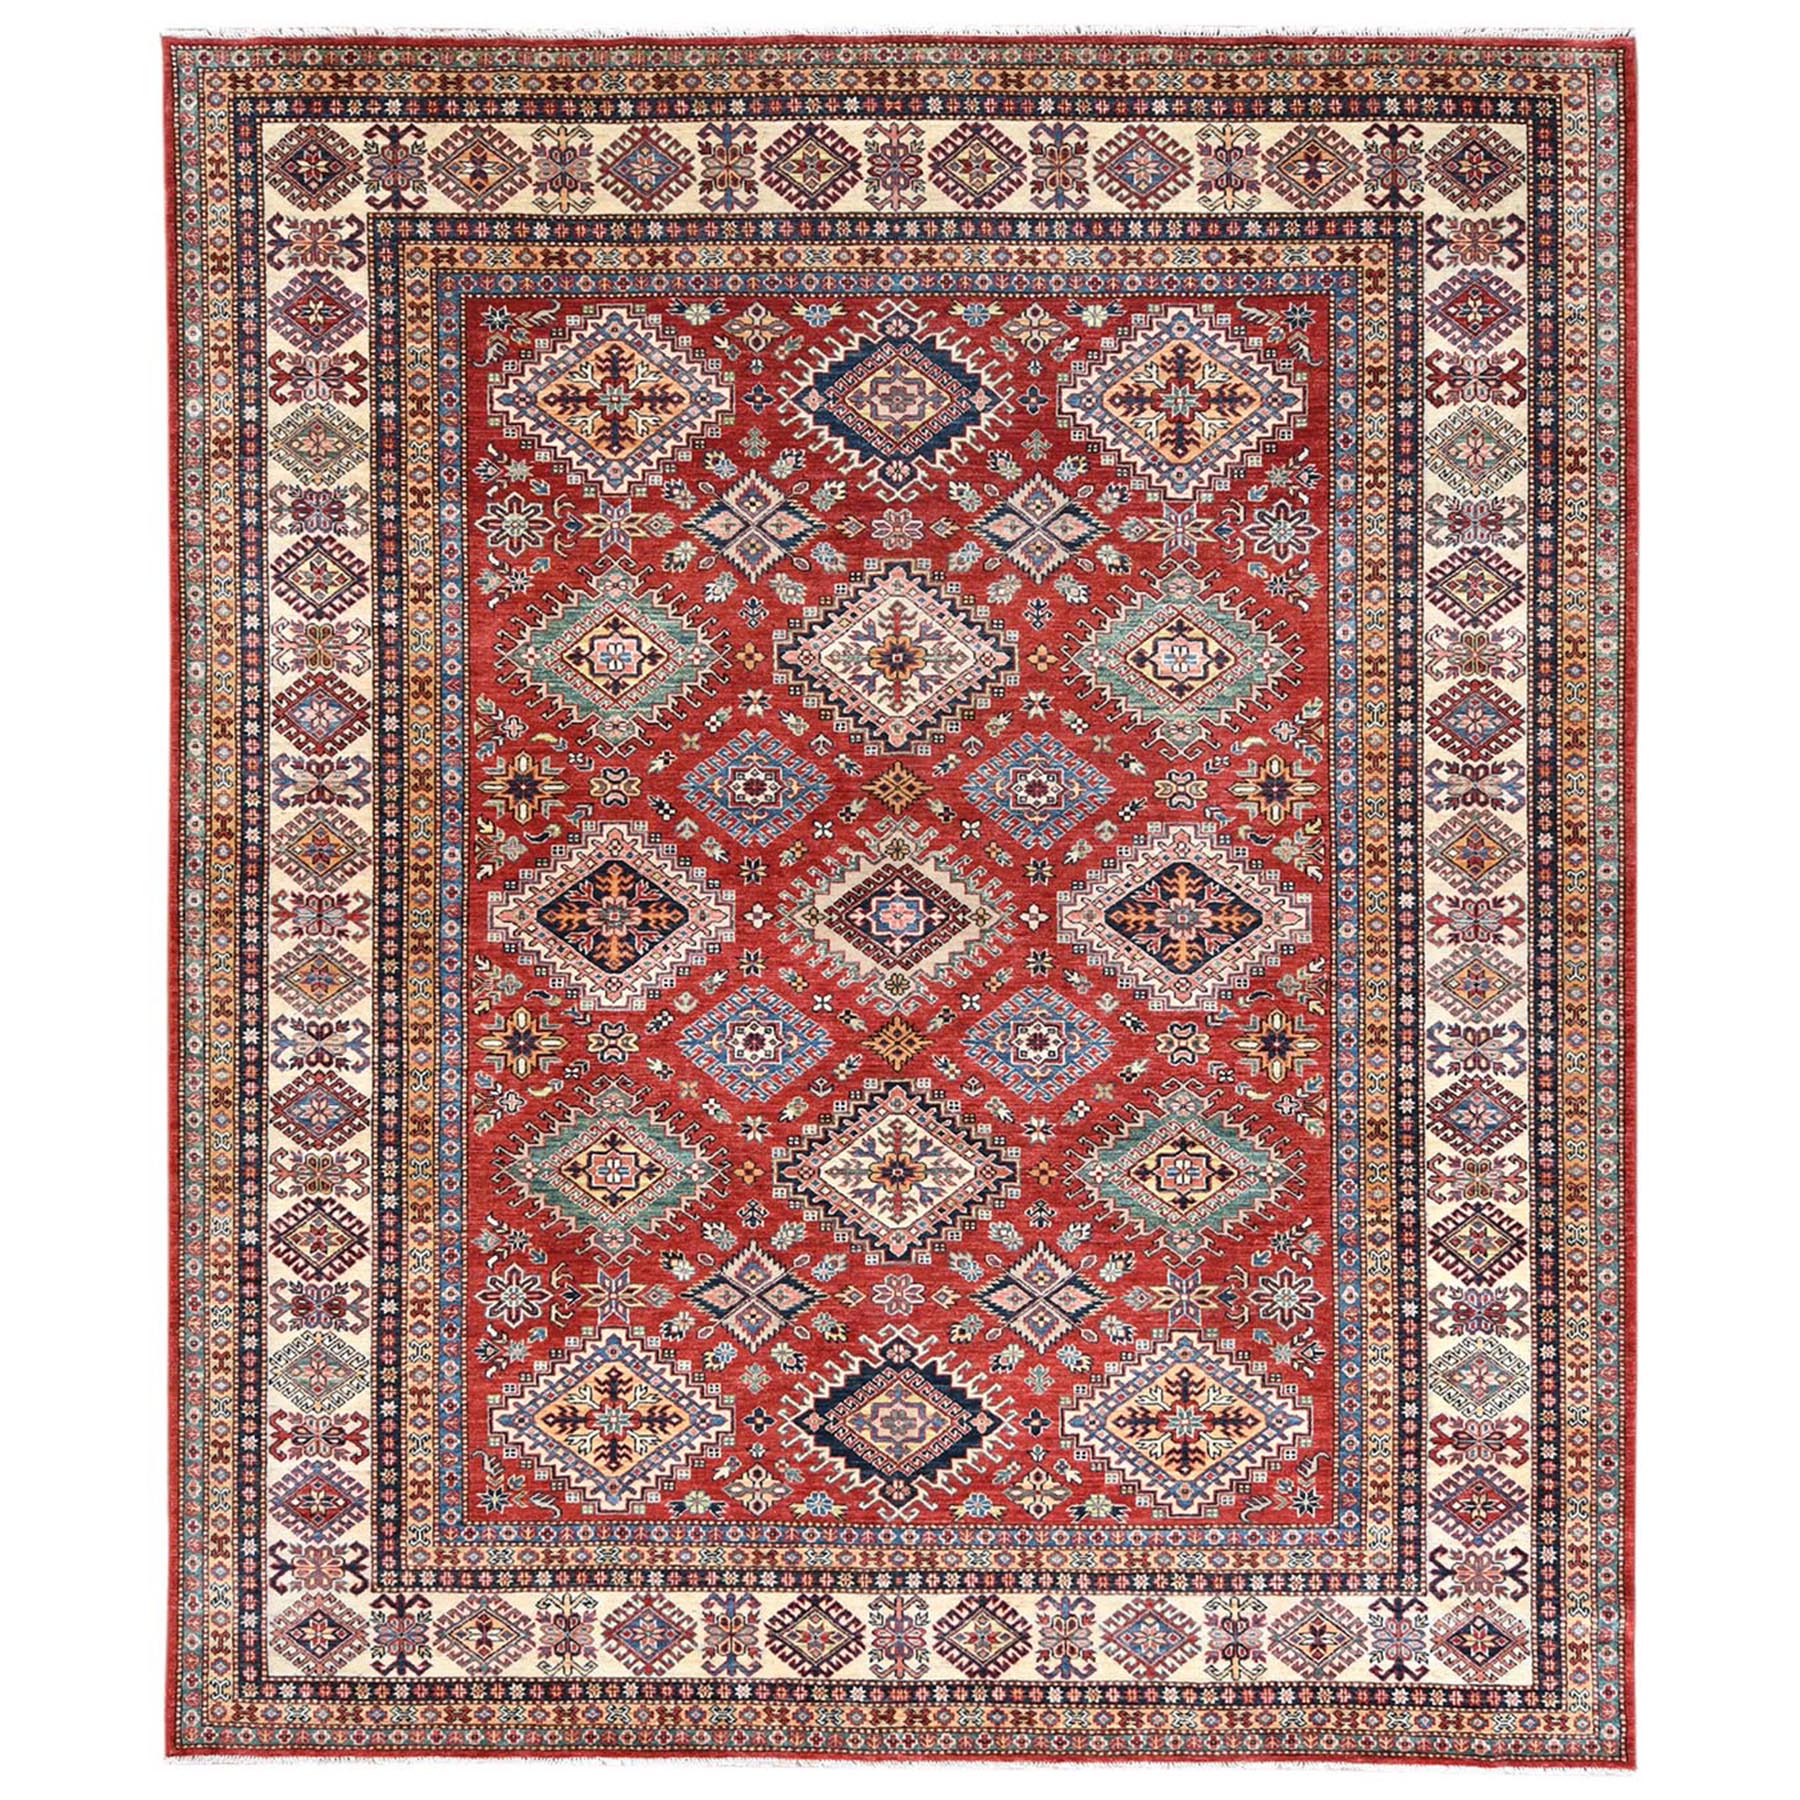 8'2"x9'8" Super Kazak with Geometric Medallions Red Hand Woven Natural Wool Oriental Rug 